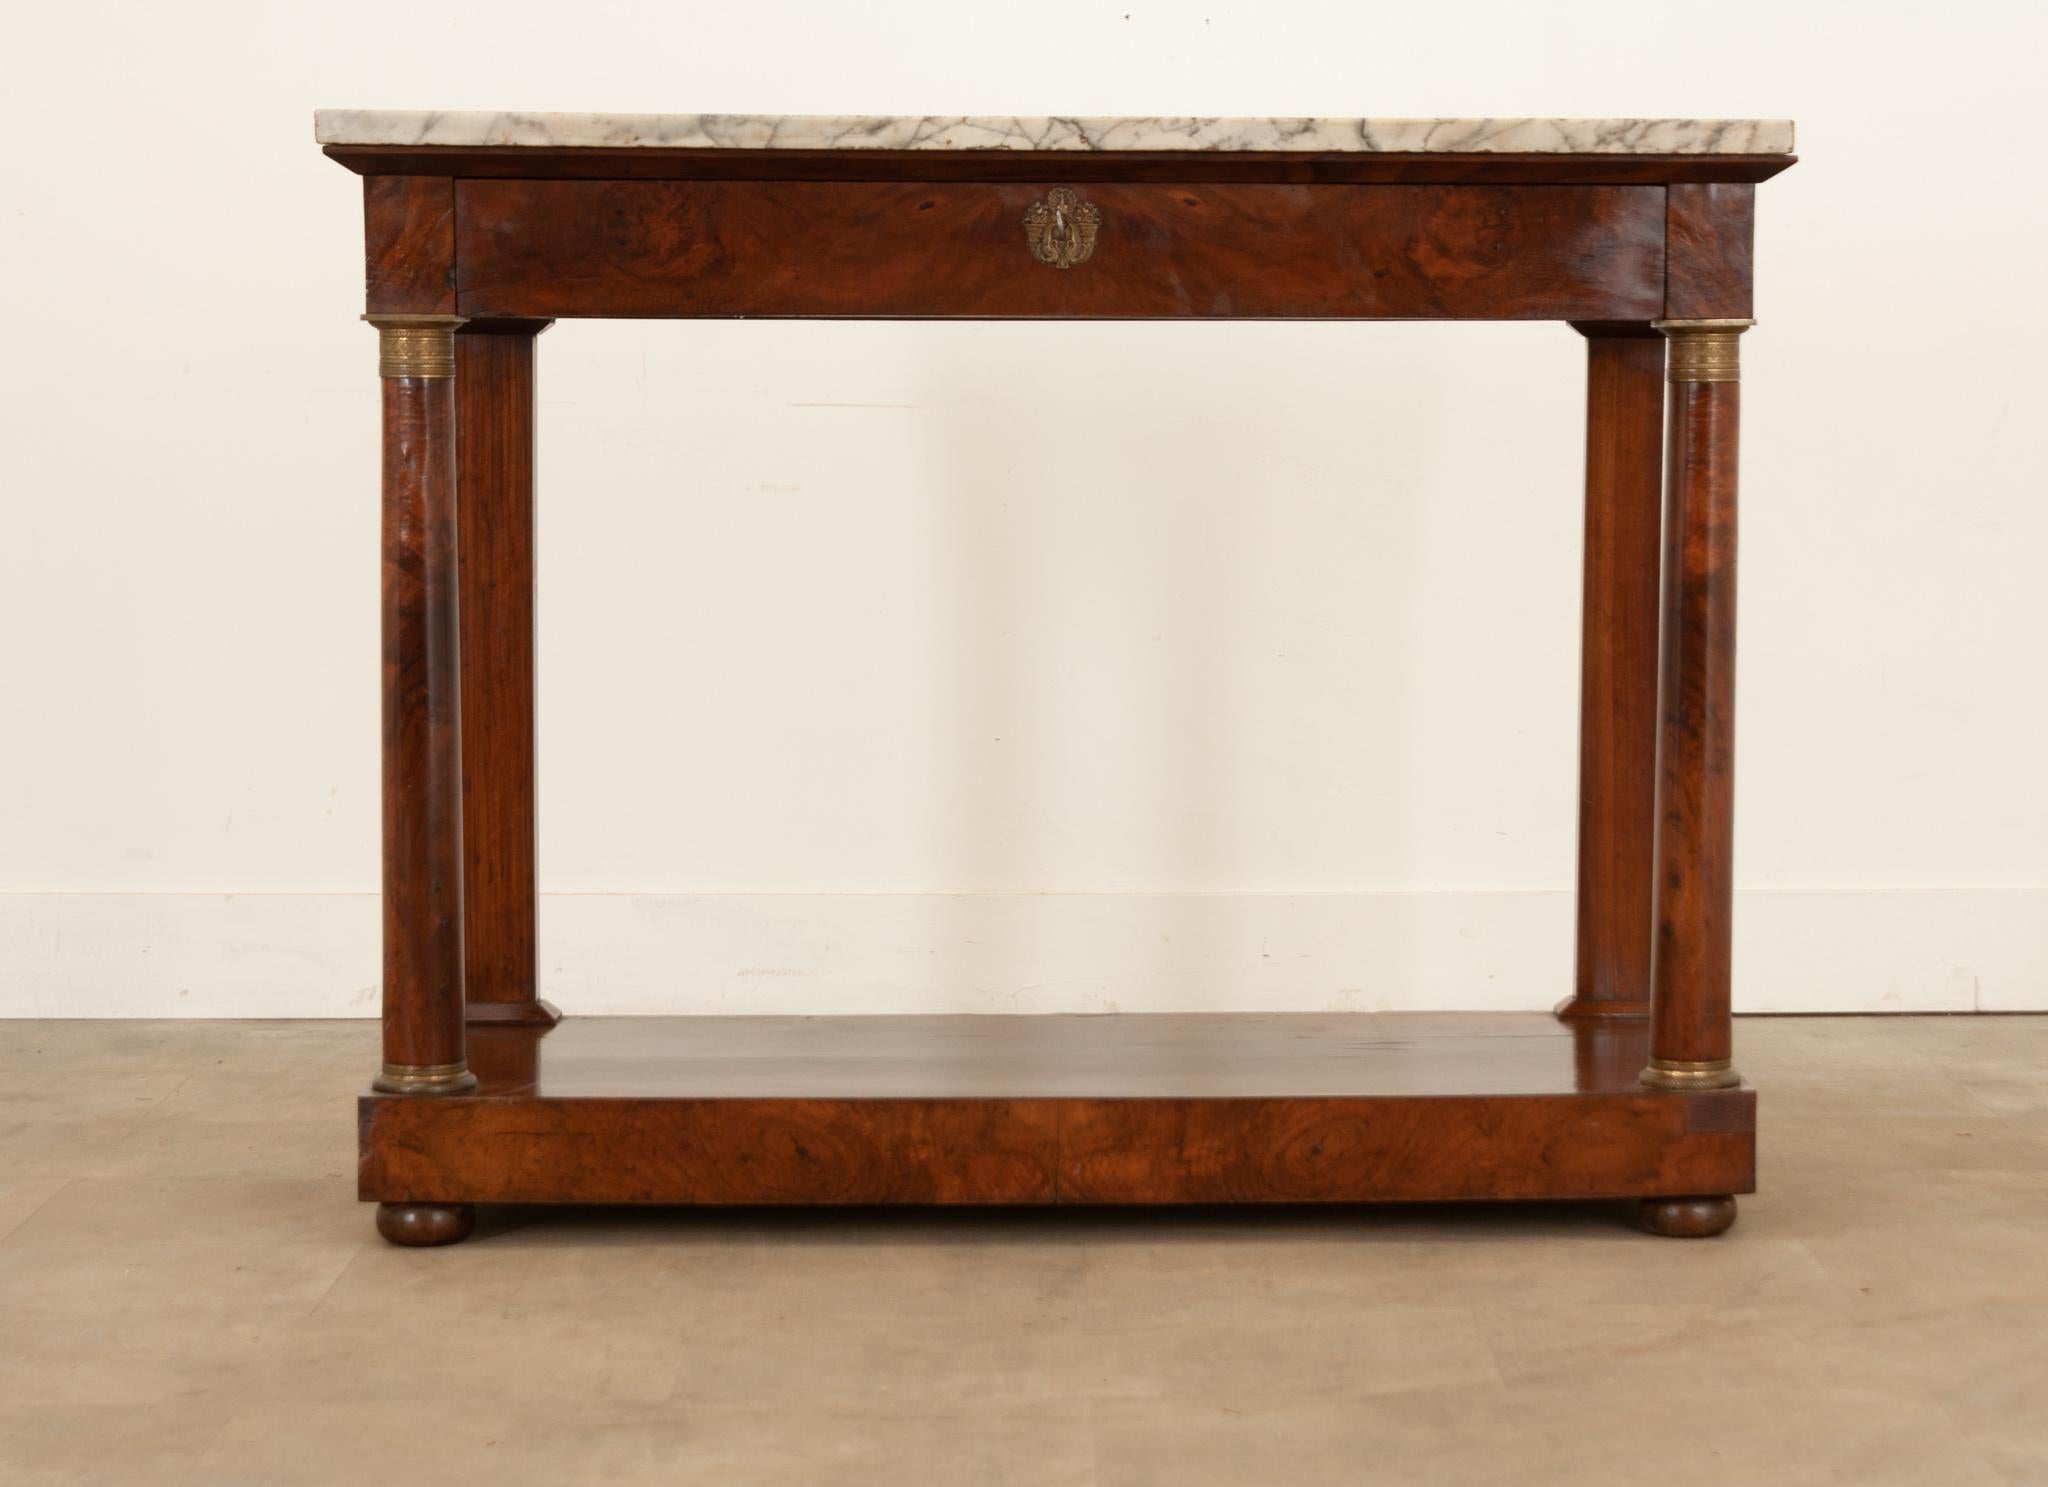 A large French Empire console, topped in marble and finished in bookmatched mahogany, made circa 1810. This Empirical antique has a white and gray marble top that is in wonderful antique condition. It has chips found about its edges and some areas